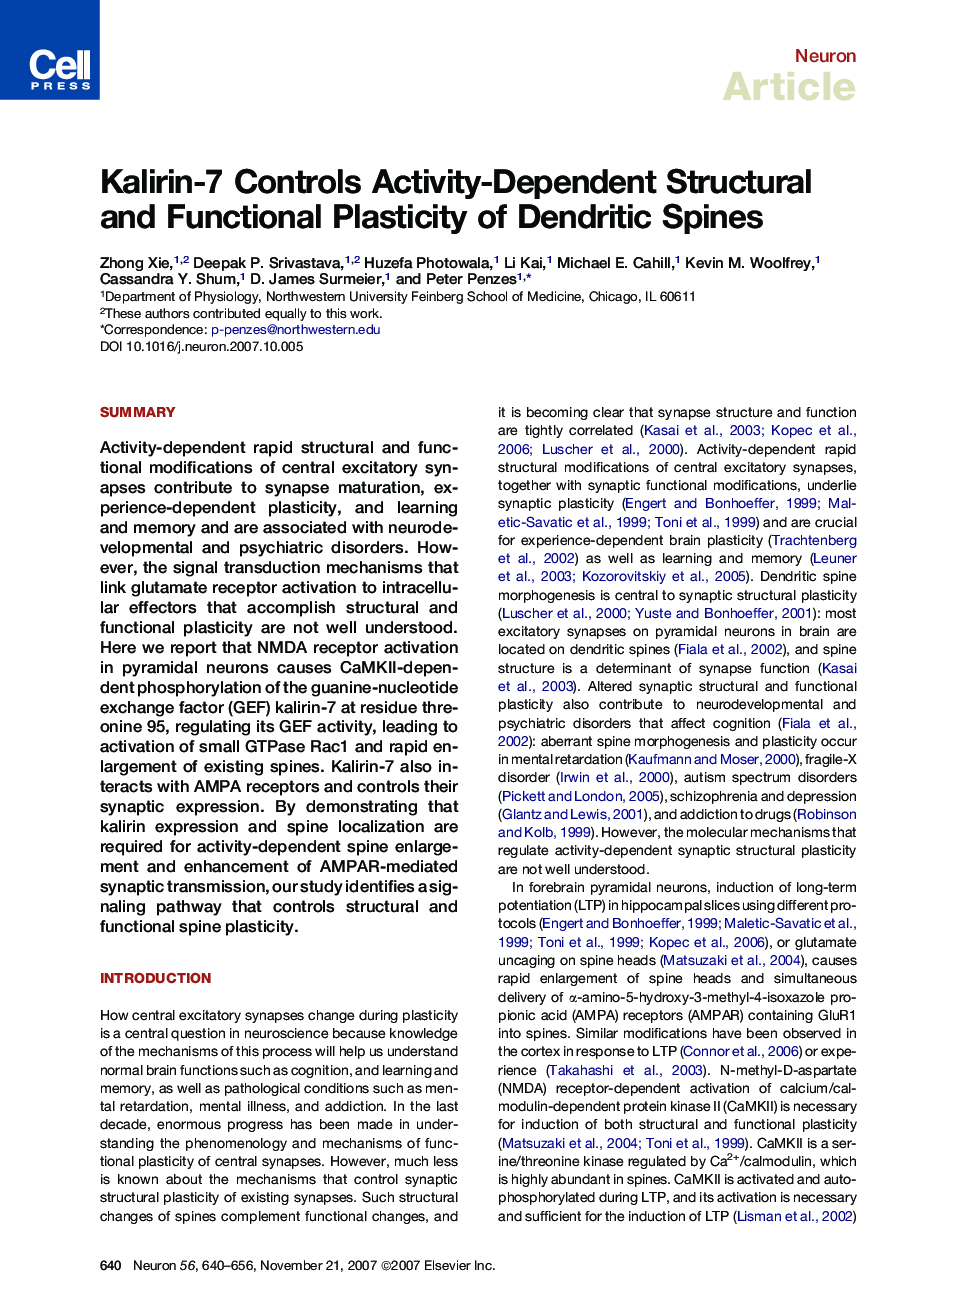 Kalirin-7 Controls Activity-Dependent Structural and Functional Plasticity of Dendritic Spines